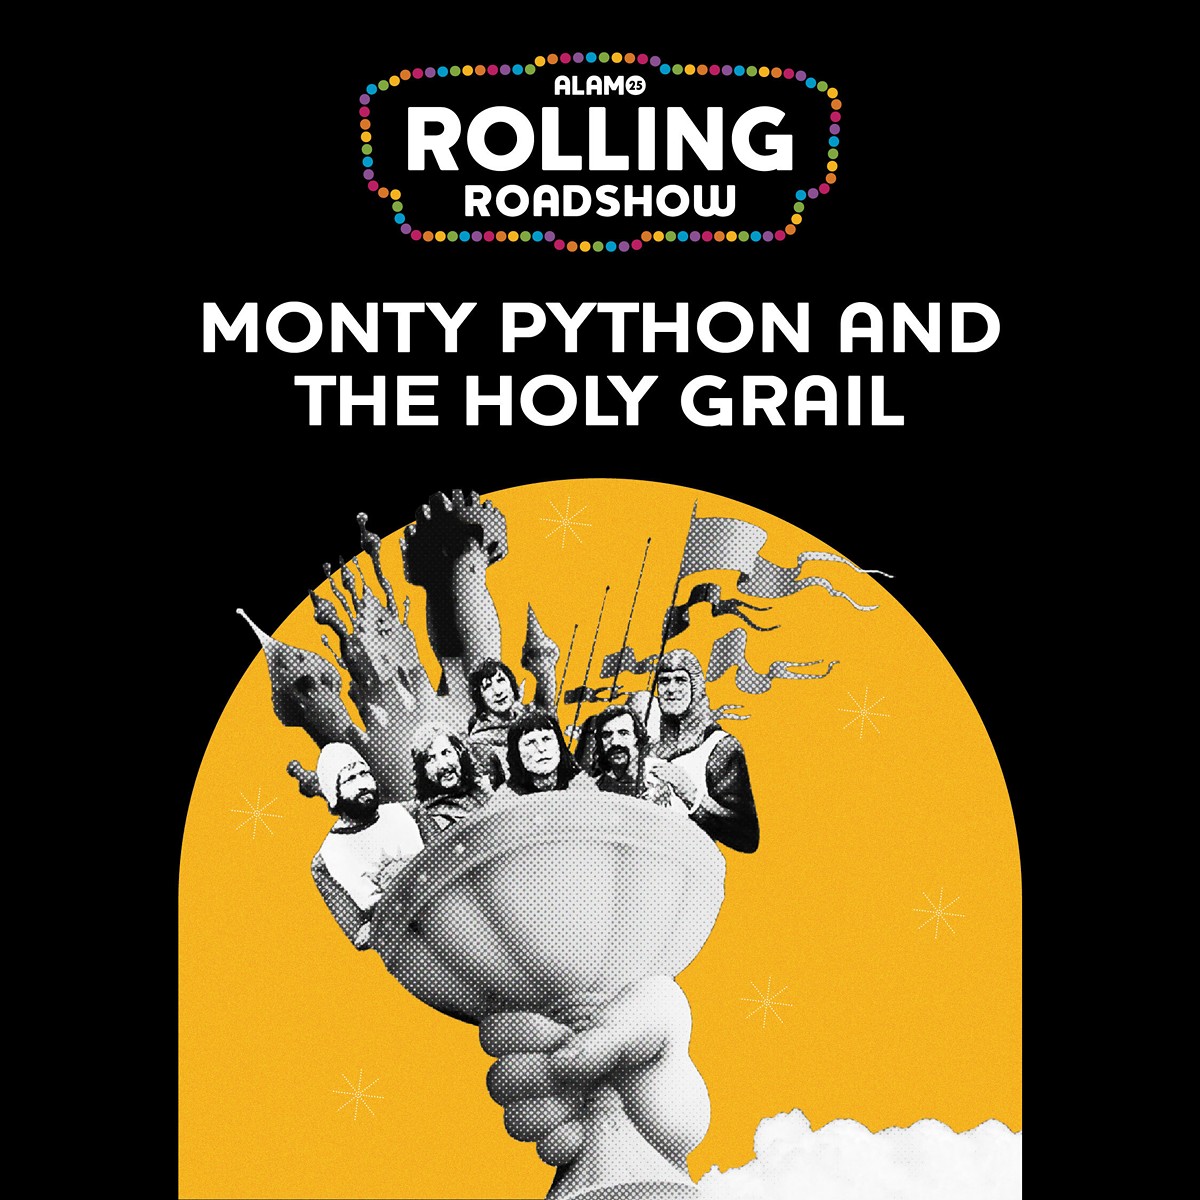 SEEK THE GRAIL AT AN UNFORGETTABLE ROLLING ROADSHOW MOVIE PARTY ON 08/18